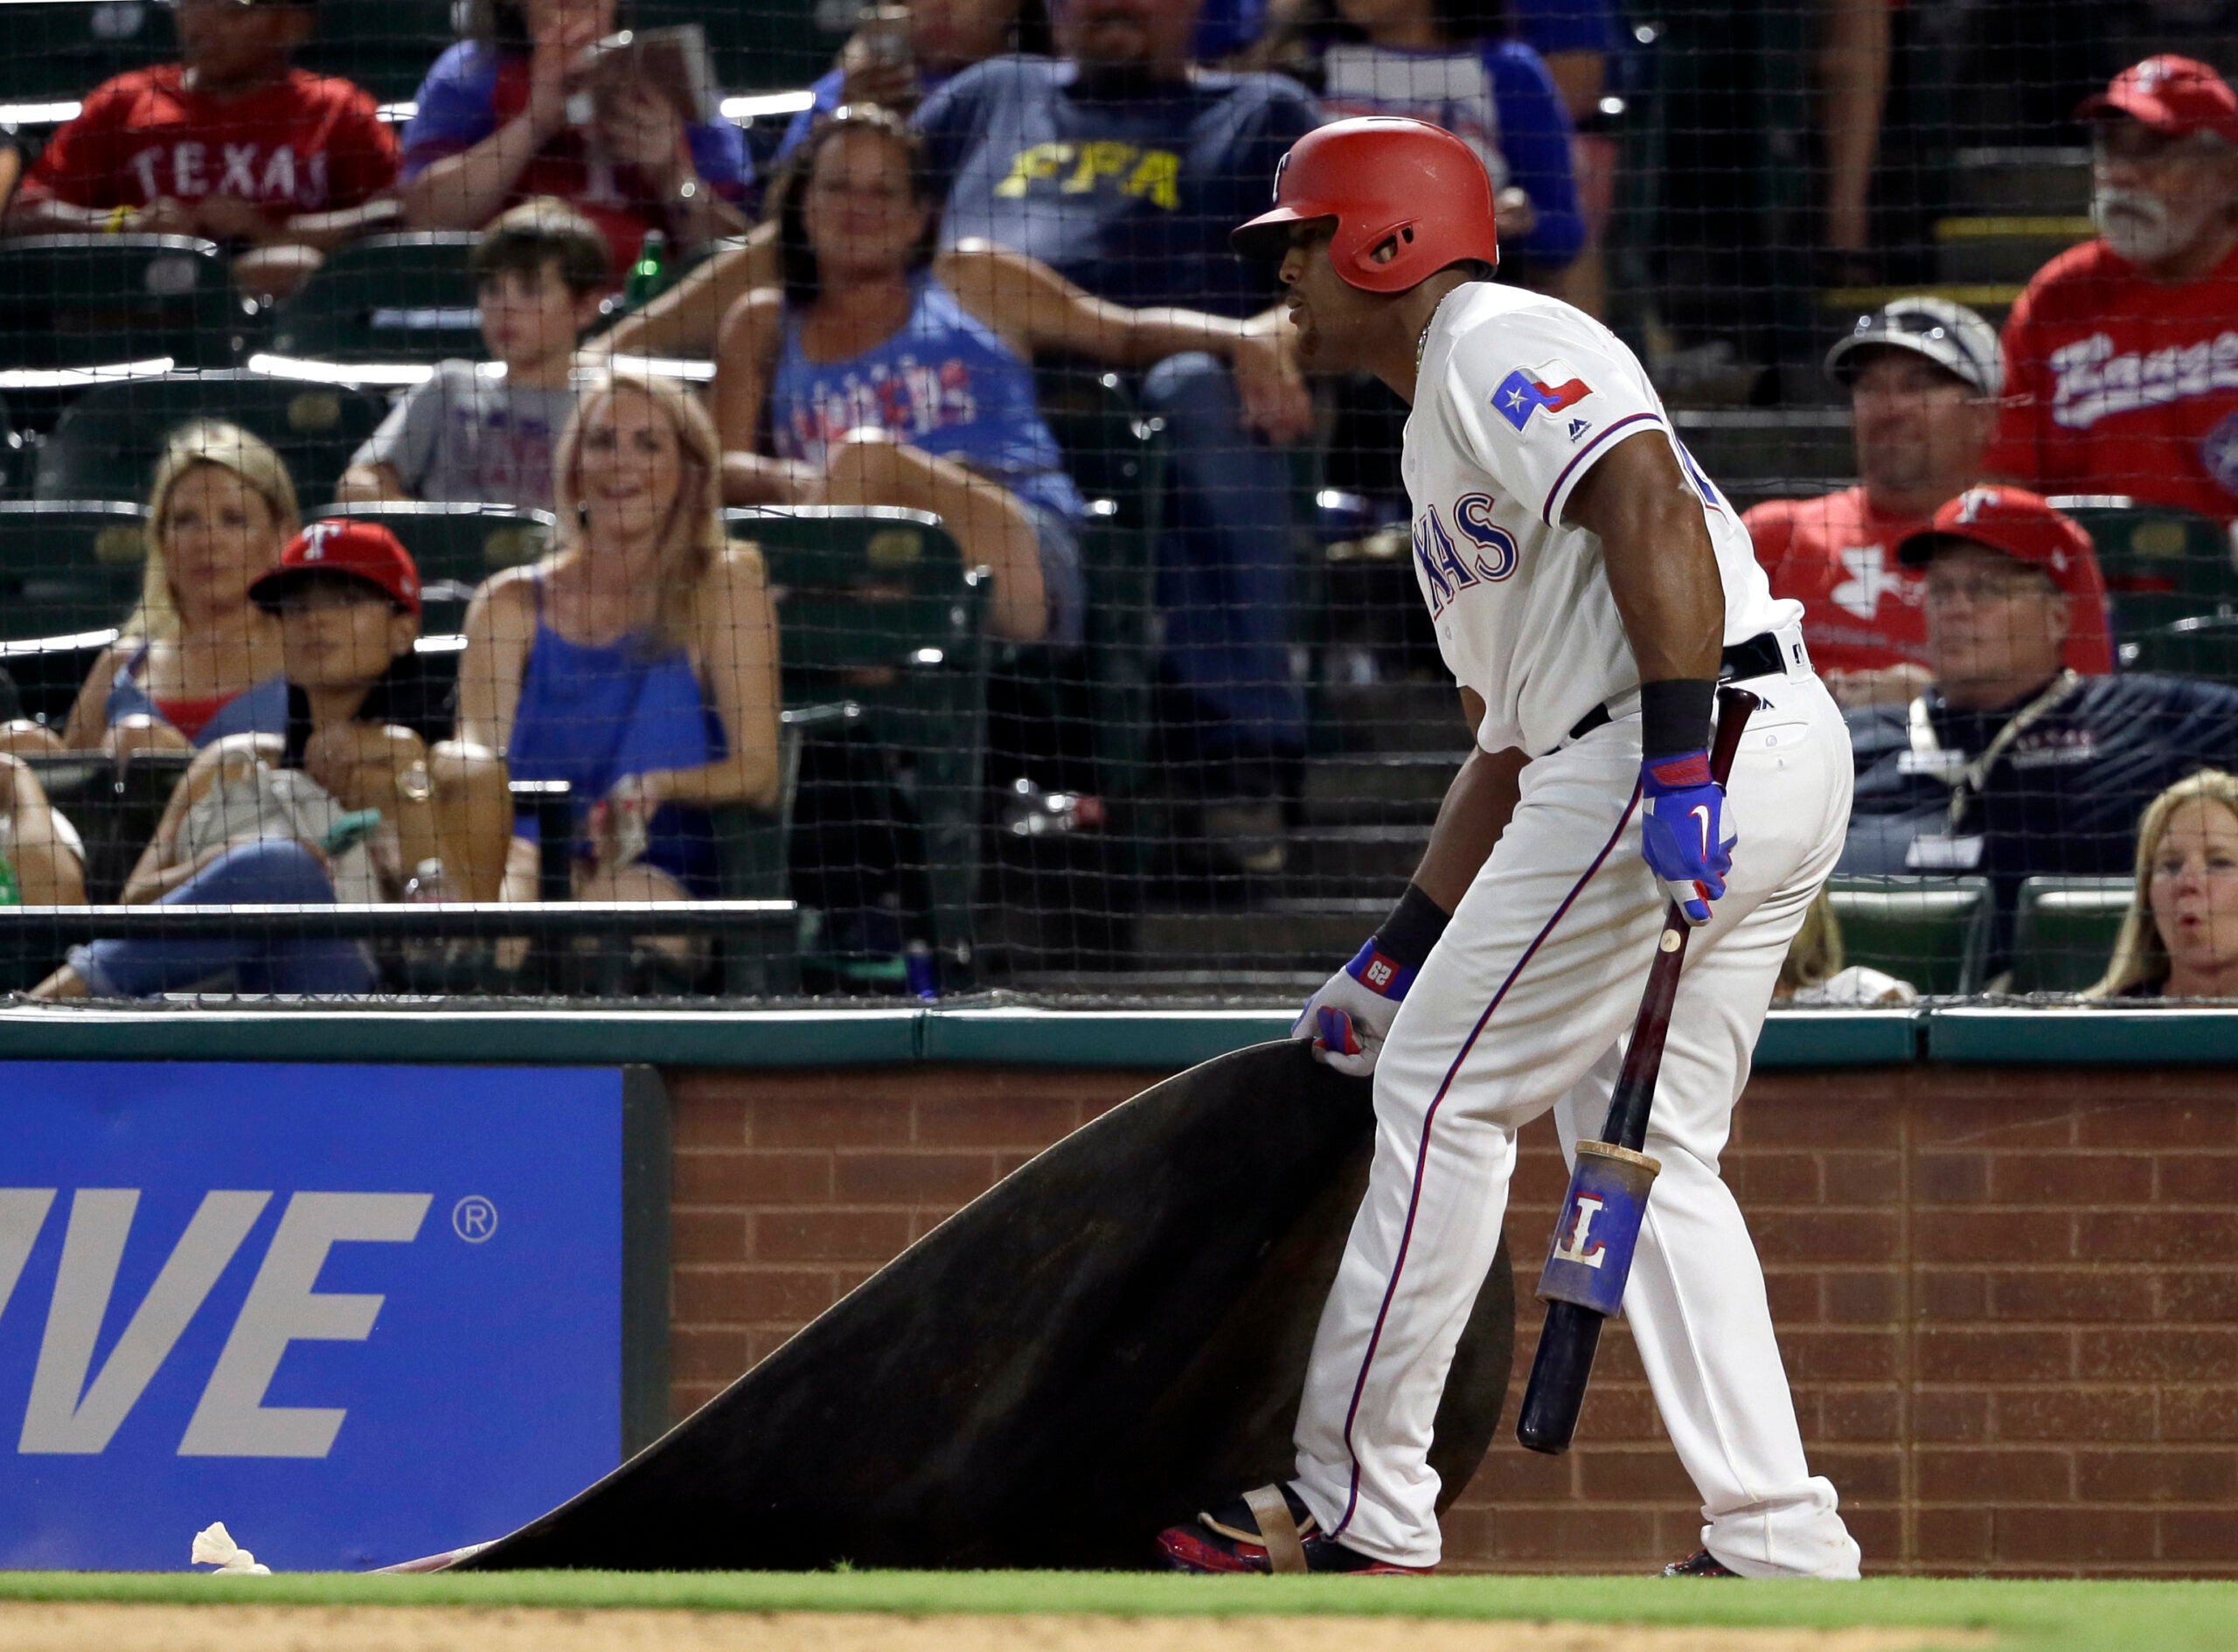 An ump told Adrian Beltre to move into the on-deck circle. So Beltre moved  the circle